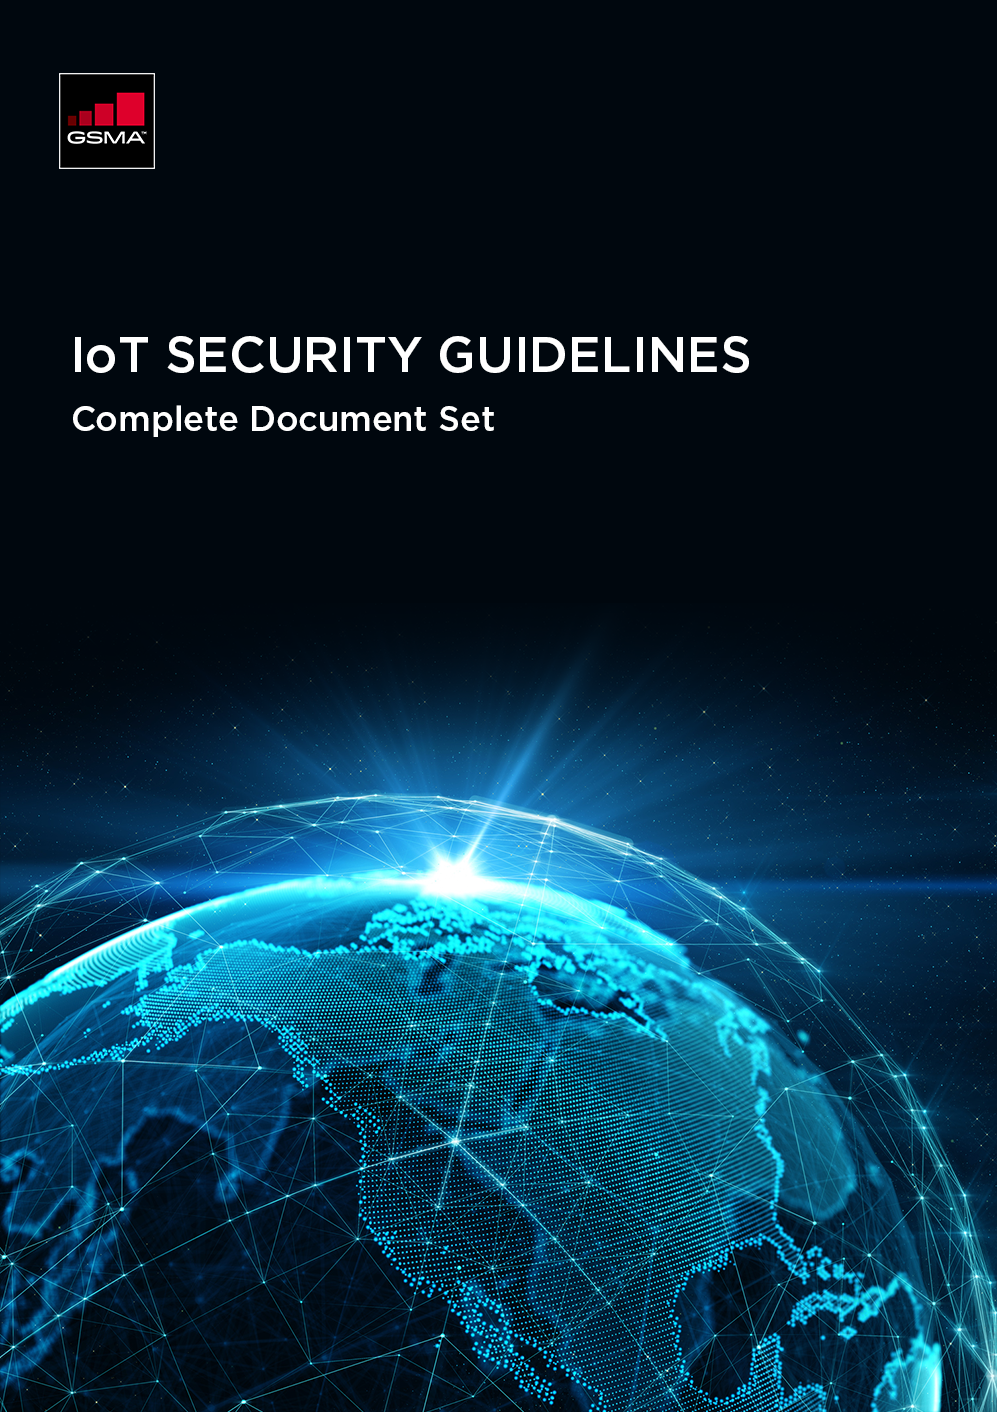 GSMA IoT Security Guidelines – Complete Document Set image